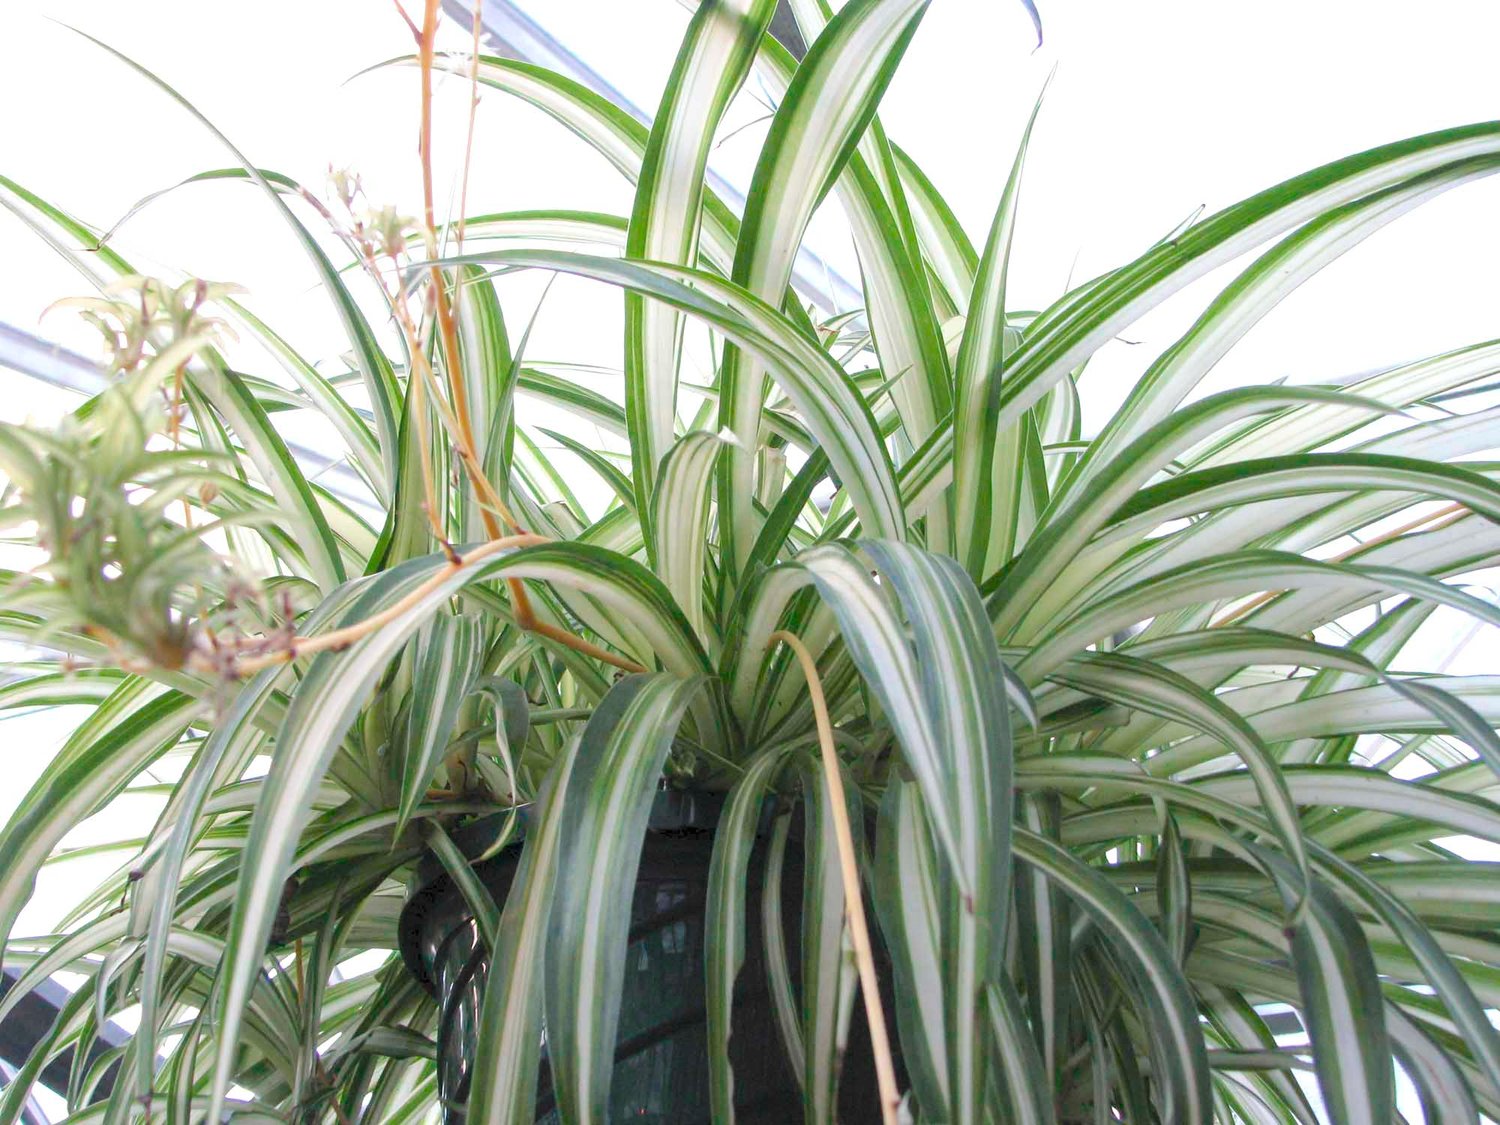 SPRING CLEANING — A spider plant in a hanging basket. Clean plants will help them photosynthesize better. A feather duster will make quick work, especially for plants with small leaves.